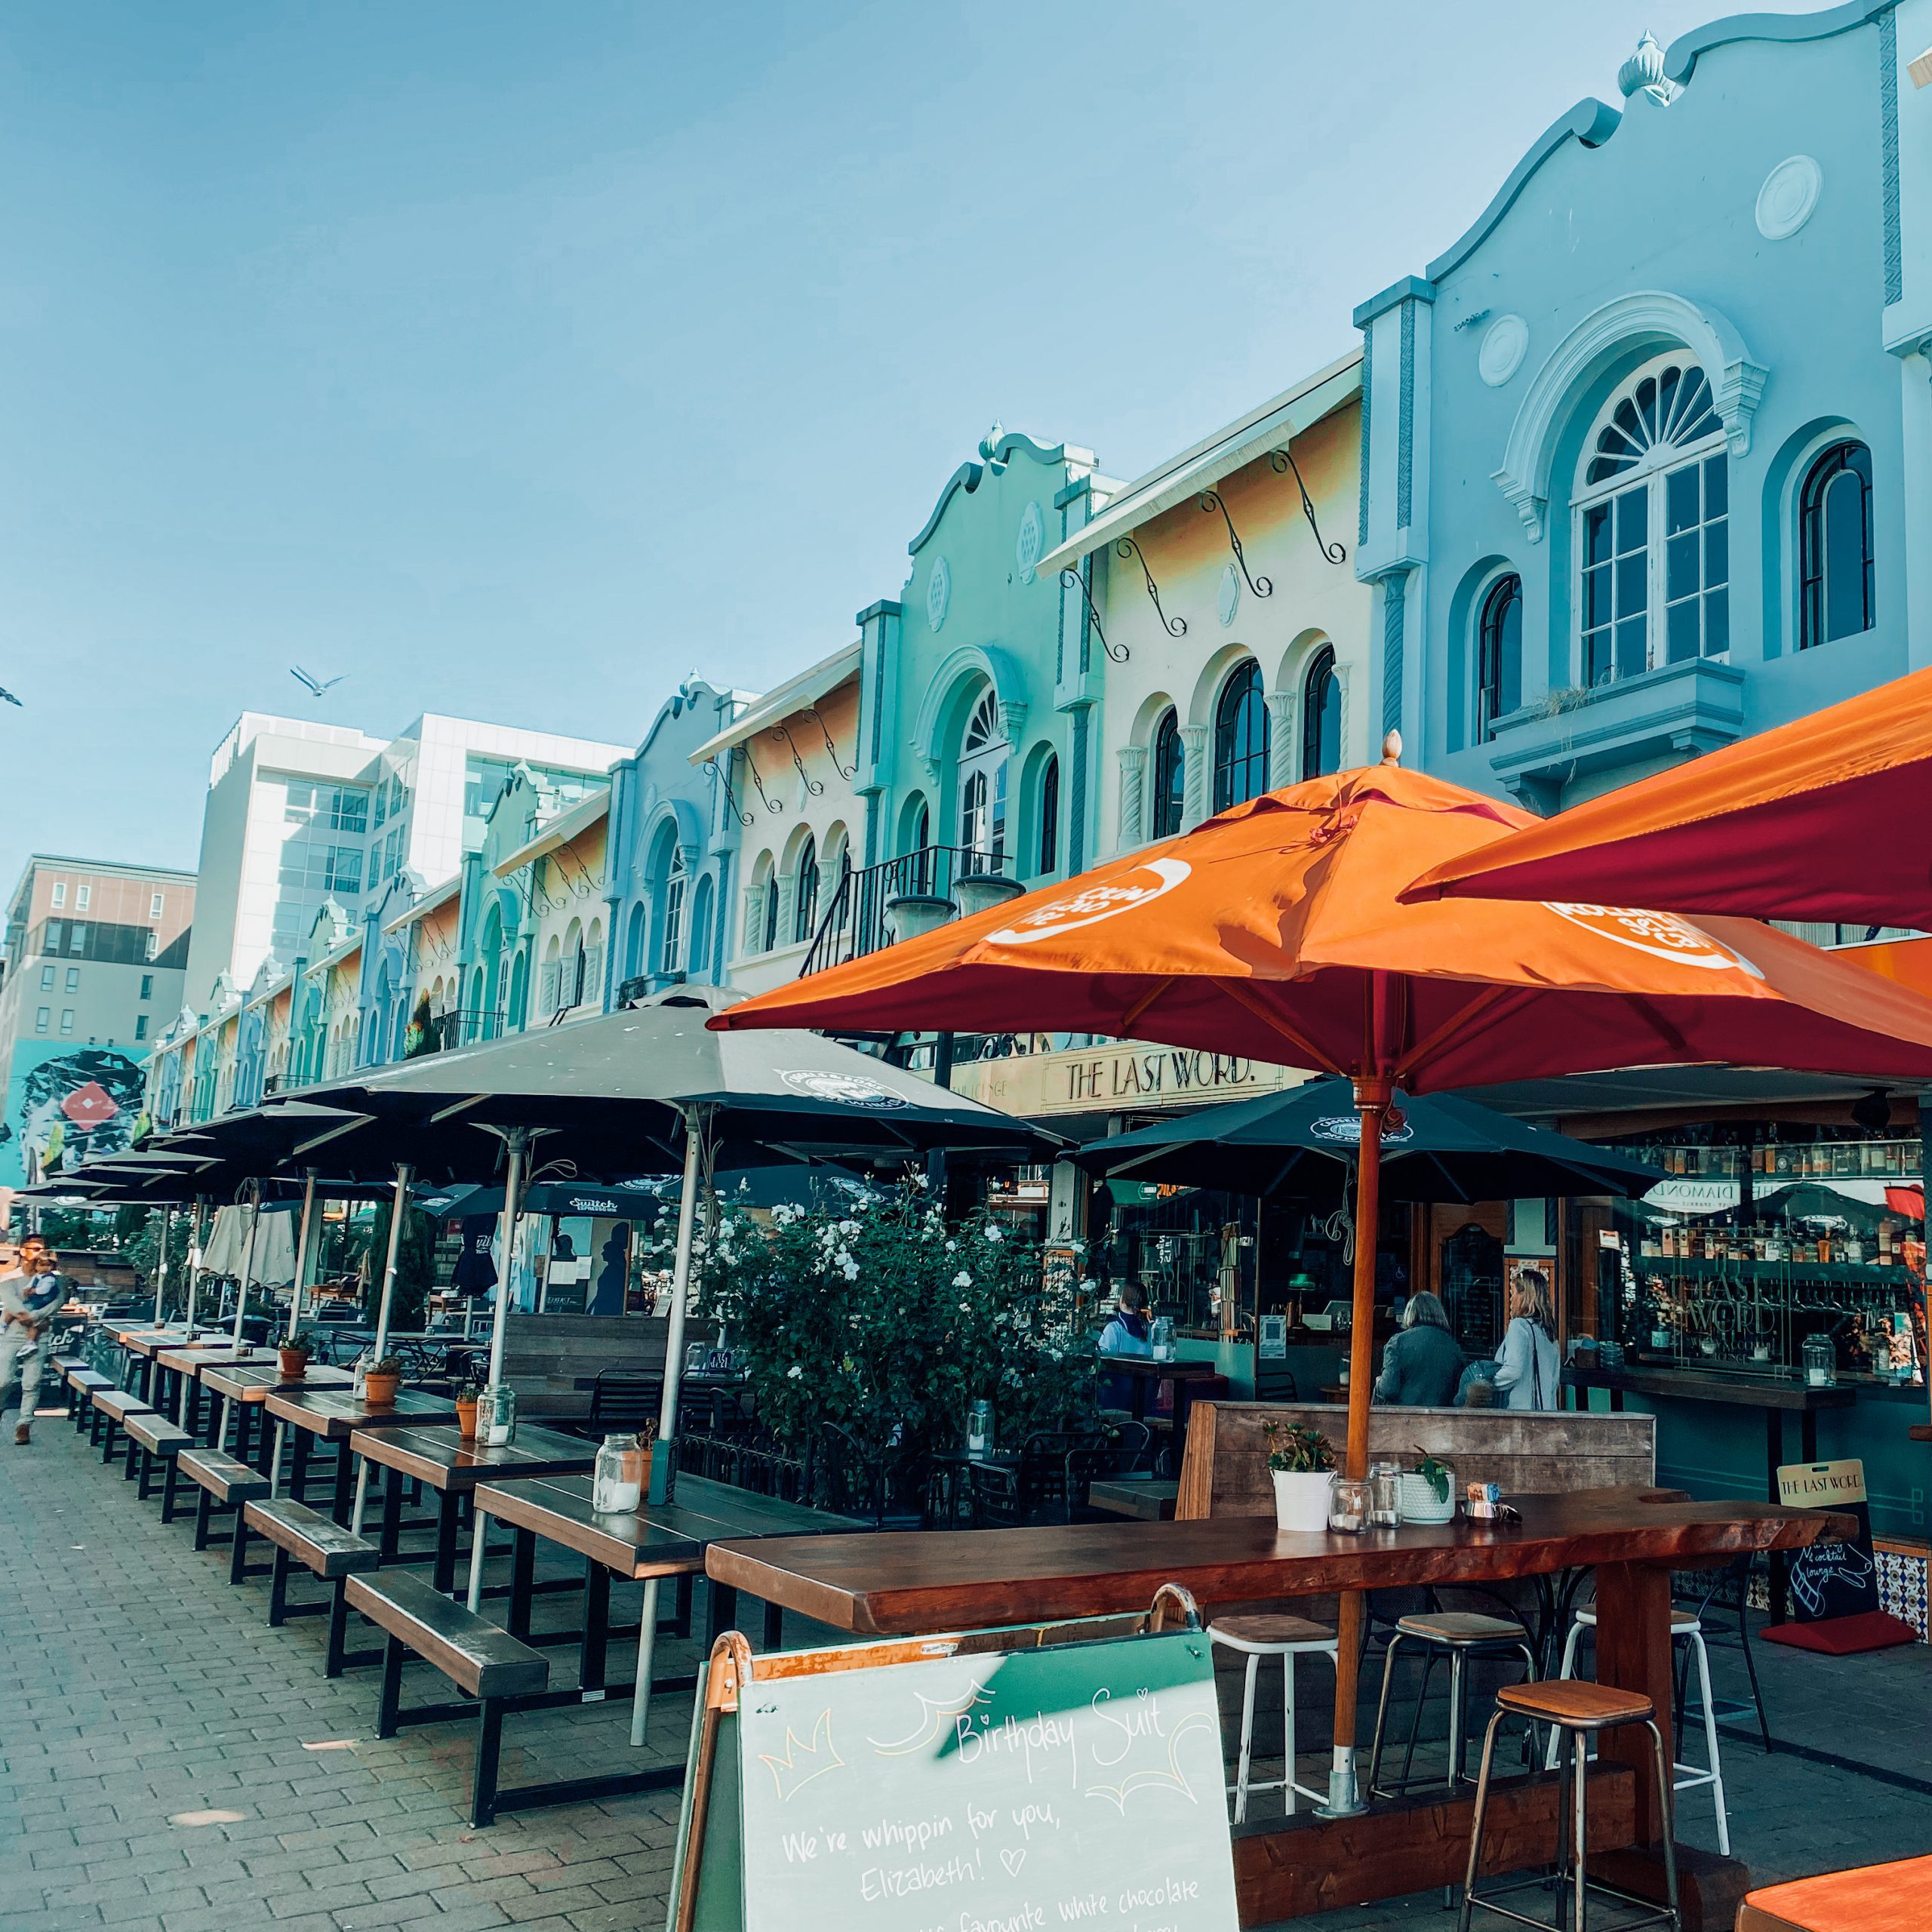 A street lined with colourful regent-style buildings with outdoor tables, benches and parasols out front.